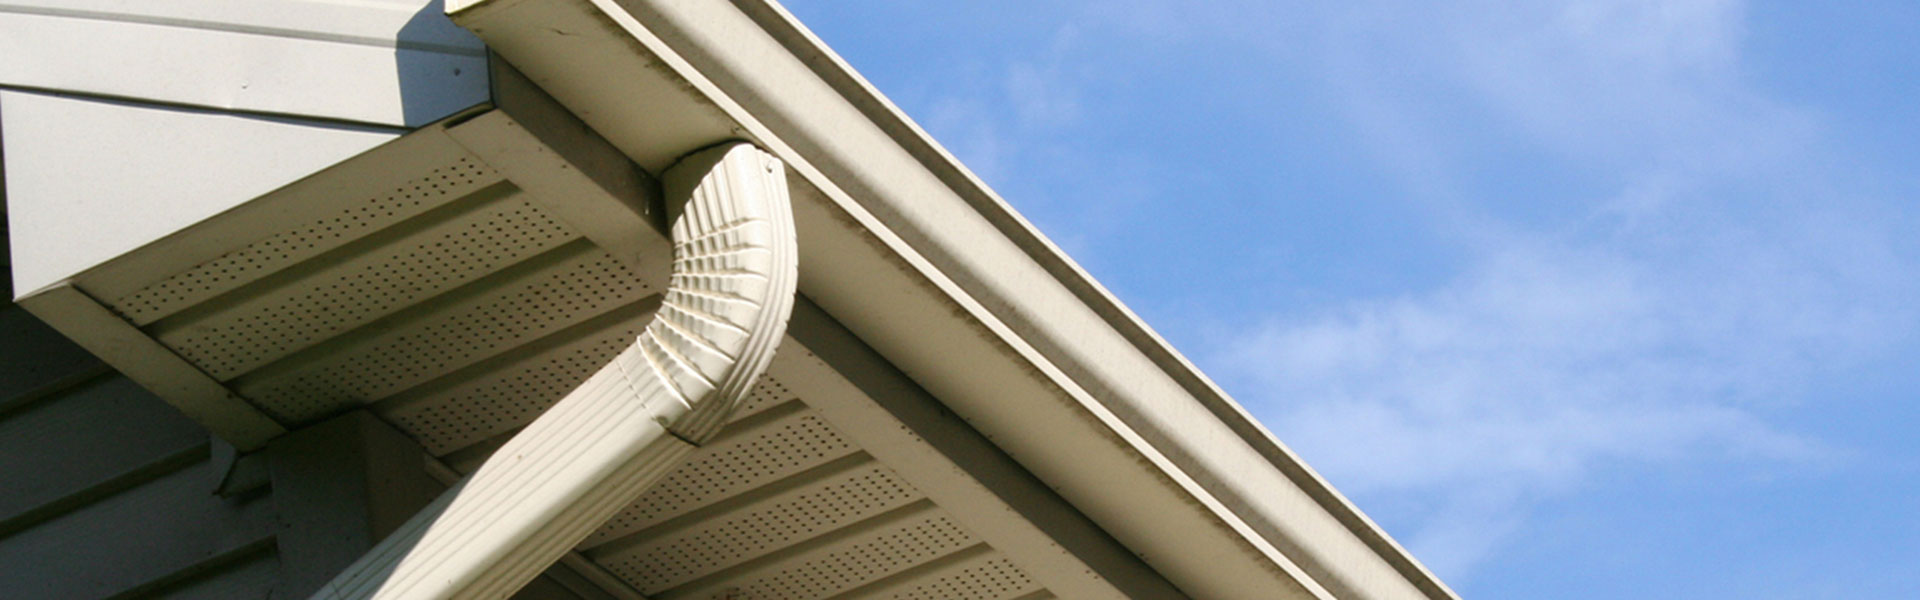 Barry Best Seamless Gutters Featured Image